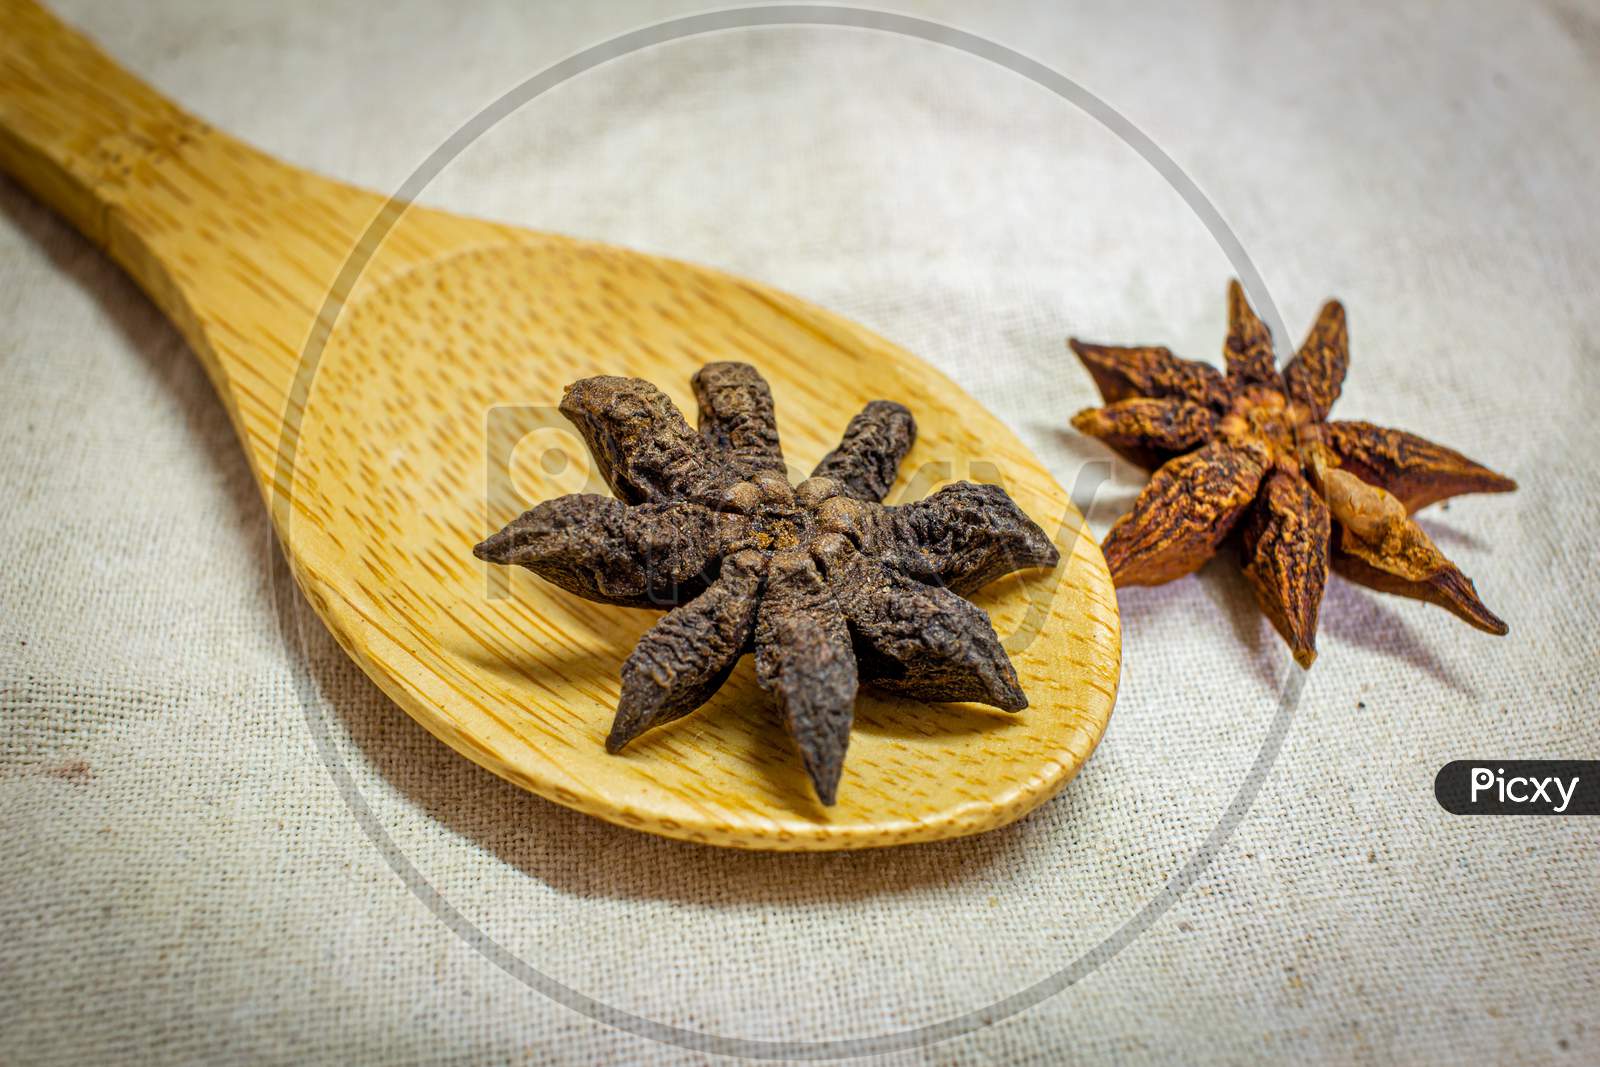 Top View Of Star Anise Which Is Commonly Used In Cooking For Flavours. Star Anise Oil Is A Highly Fragrant Oil Used In Cooking